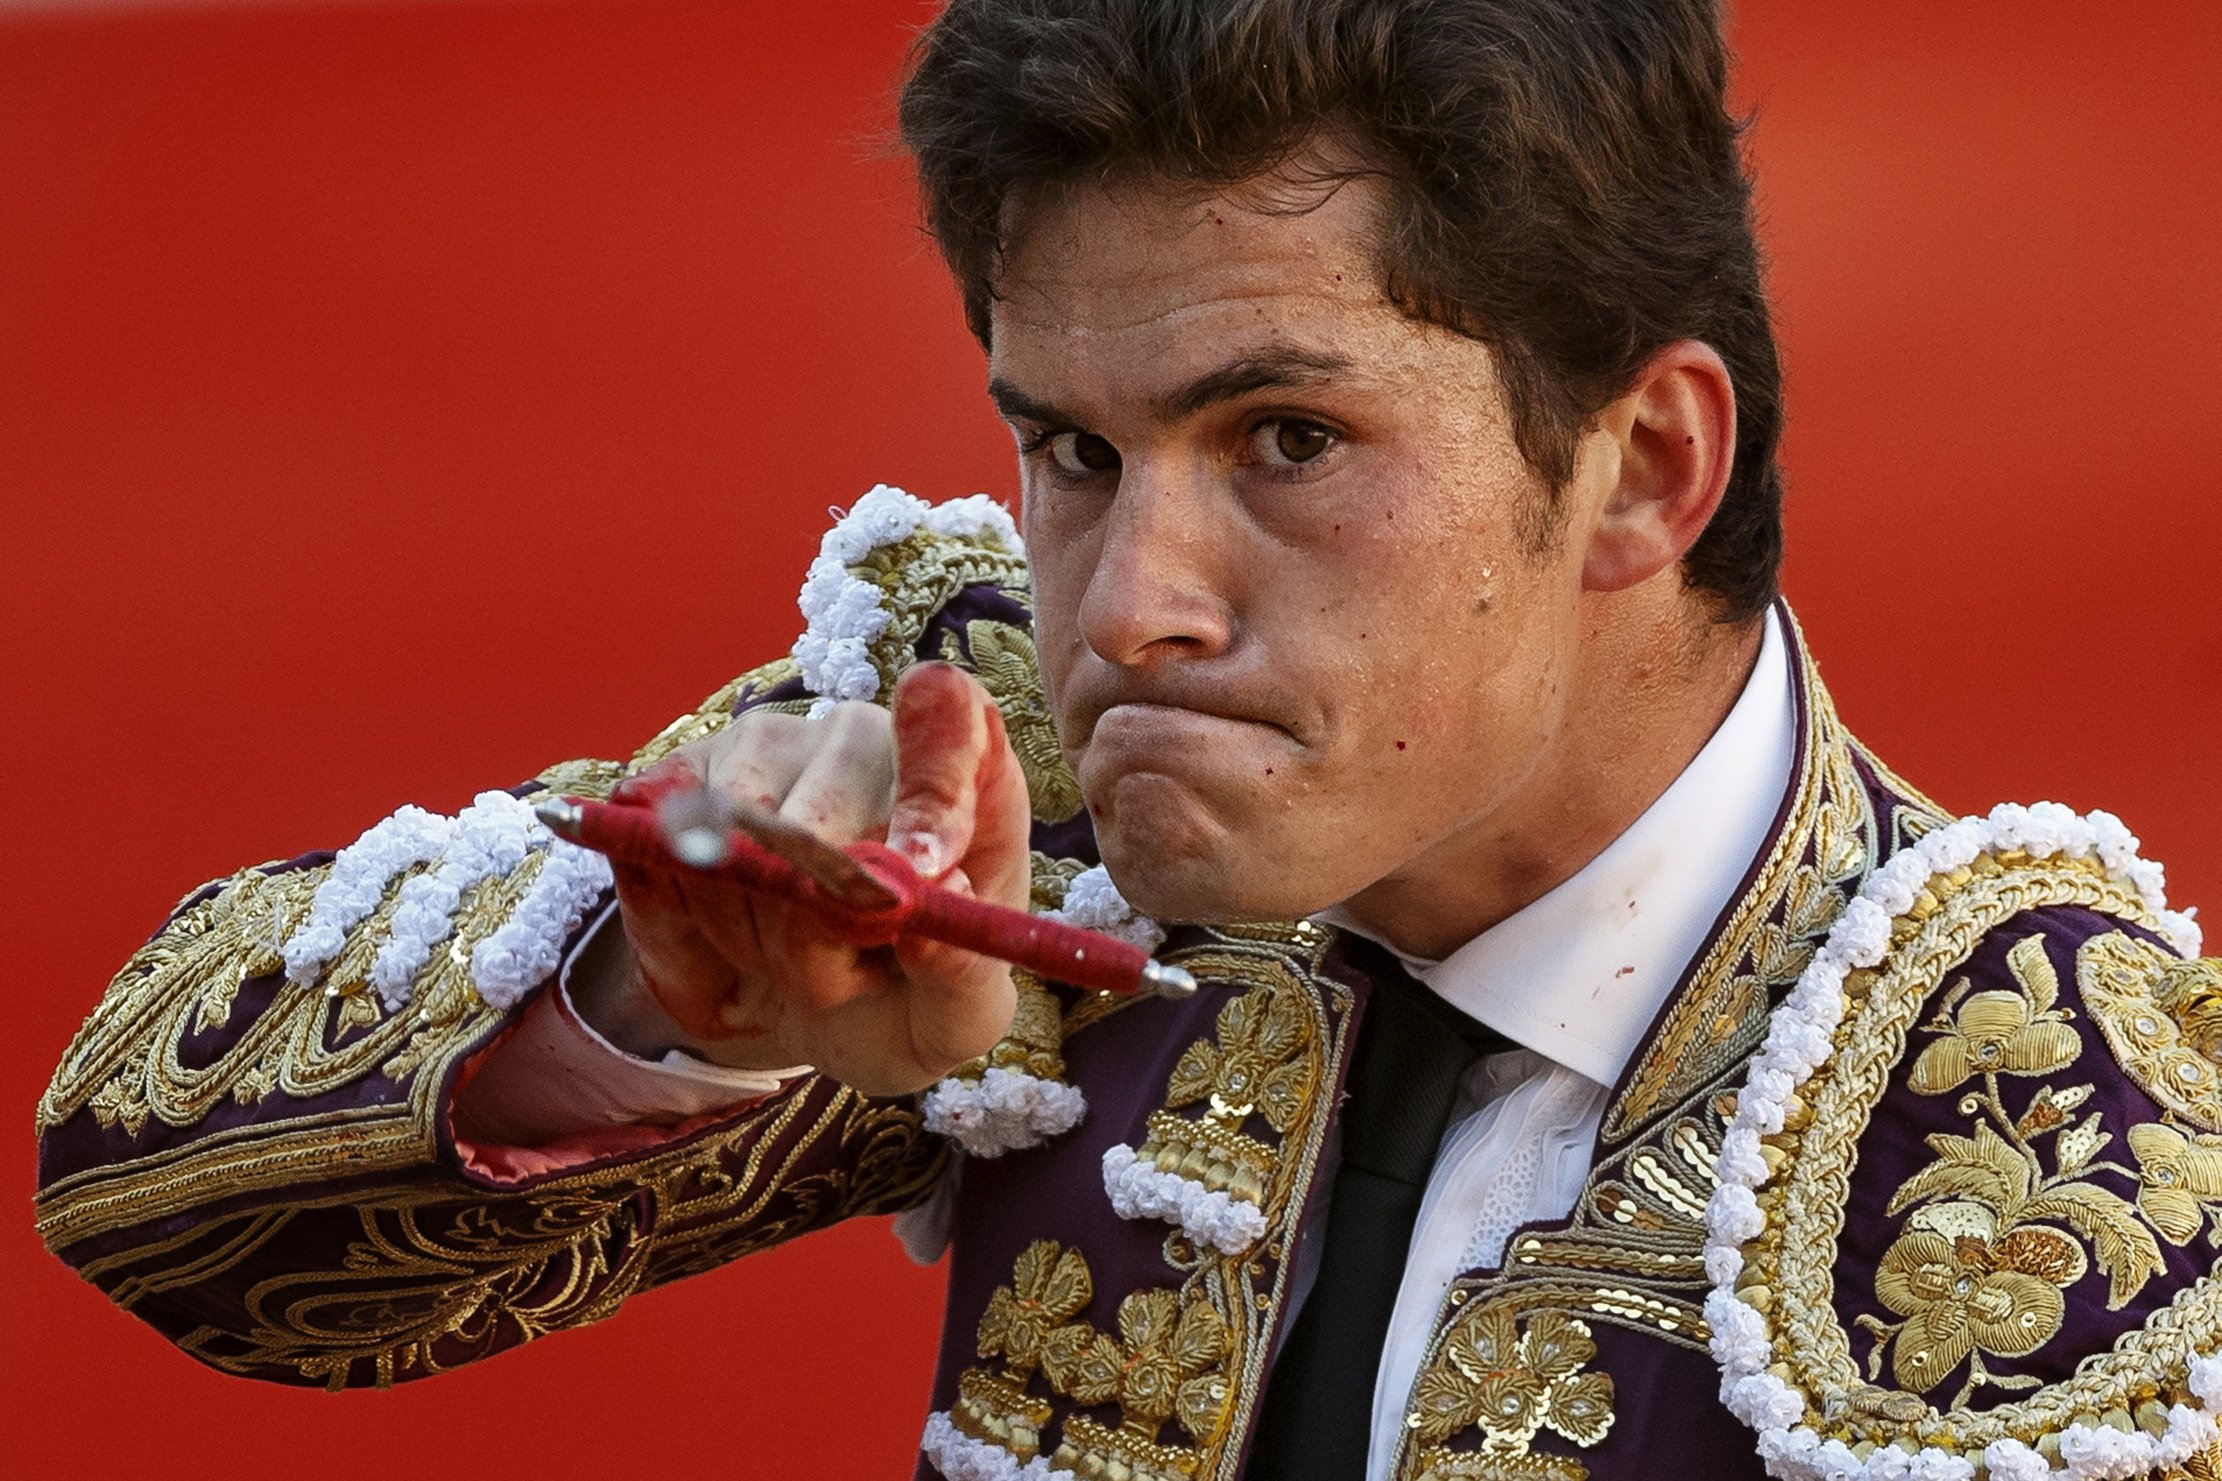 Spanish bullfighter Daniel Luque aims his sword before killing a bull during a bullfight of the San Fermin festival, in Pamplona, Spain on July 7, 2014.